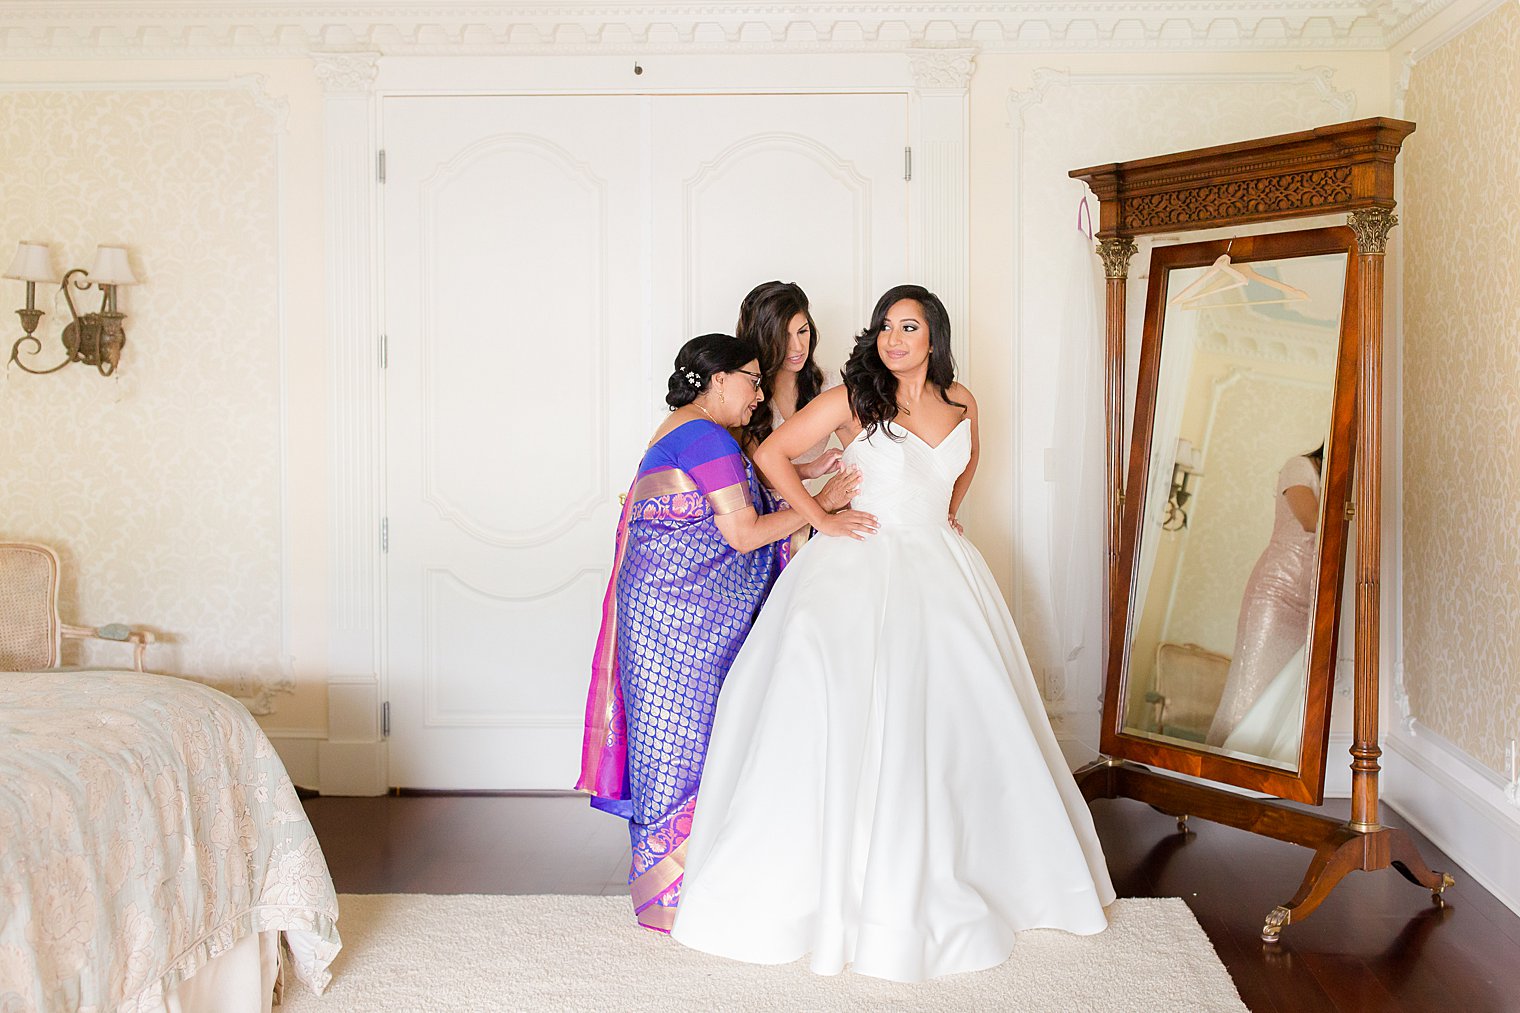 Maid of honor and mother helping bride get dressed